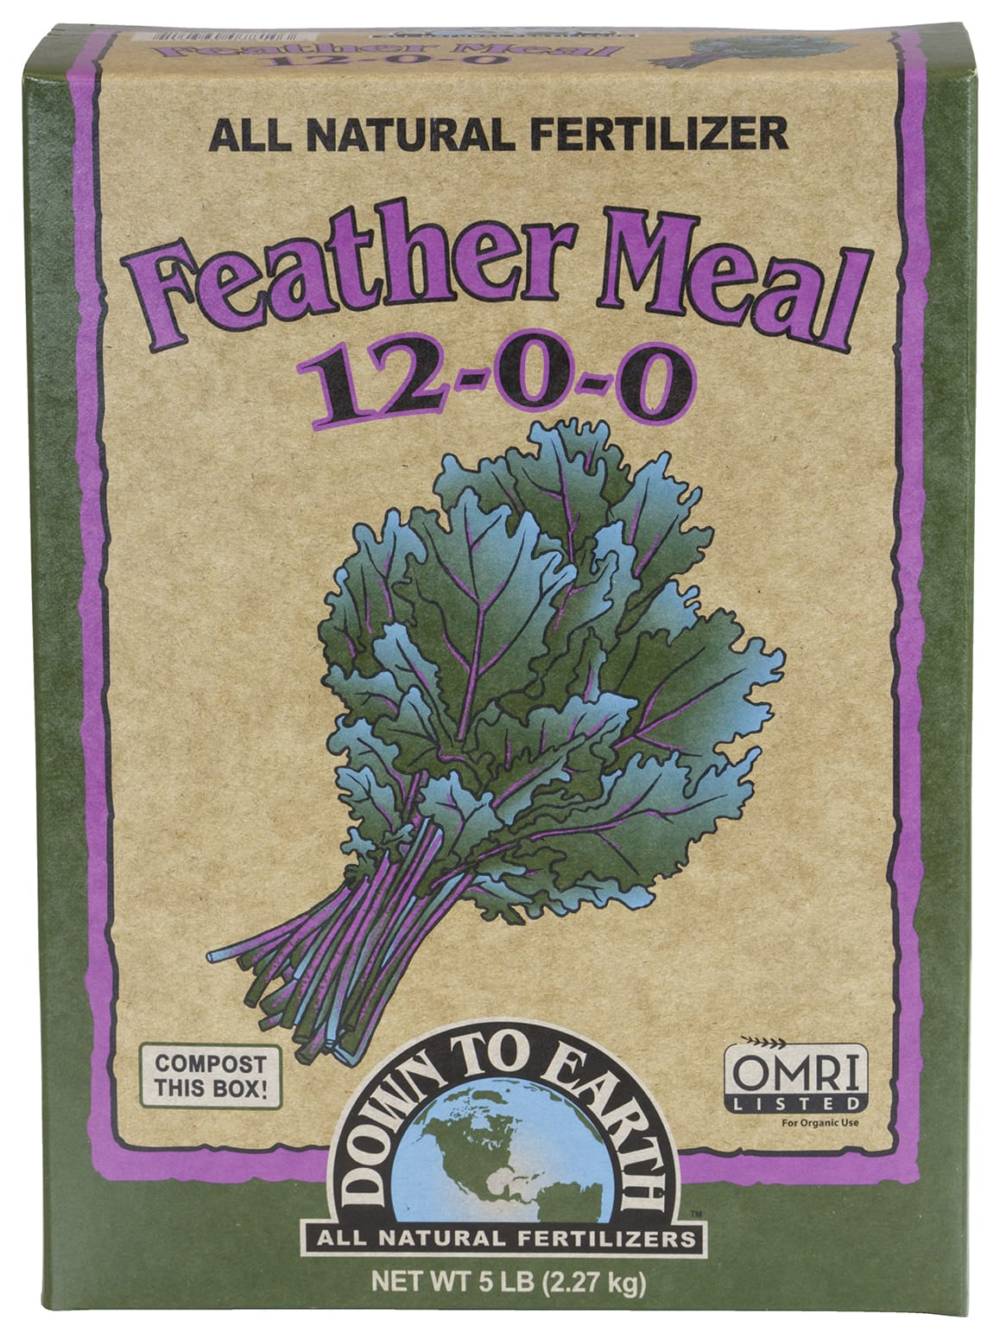 Box of Down To Earth Feather Meal